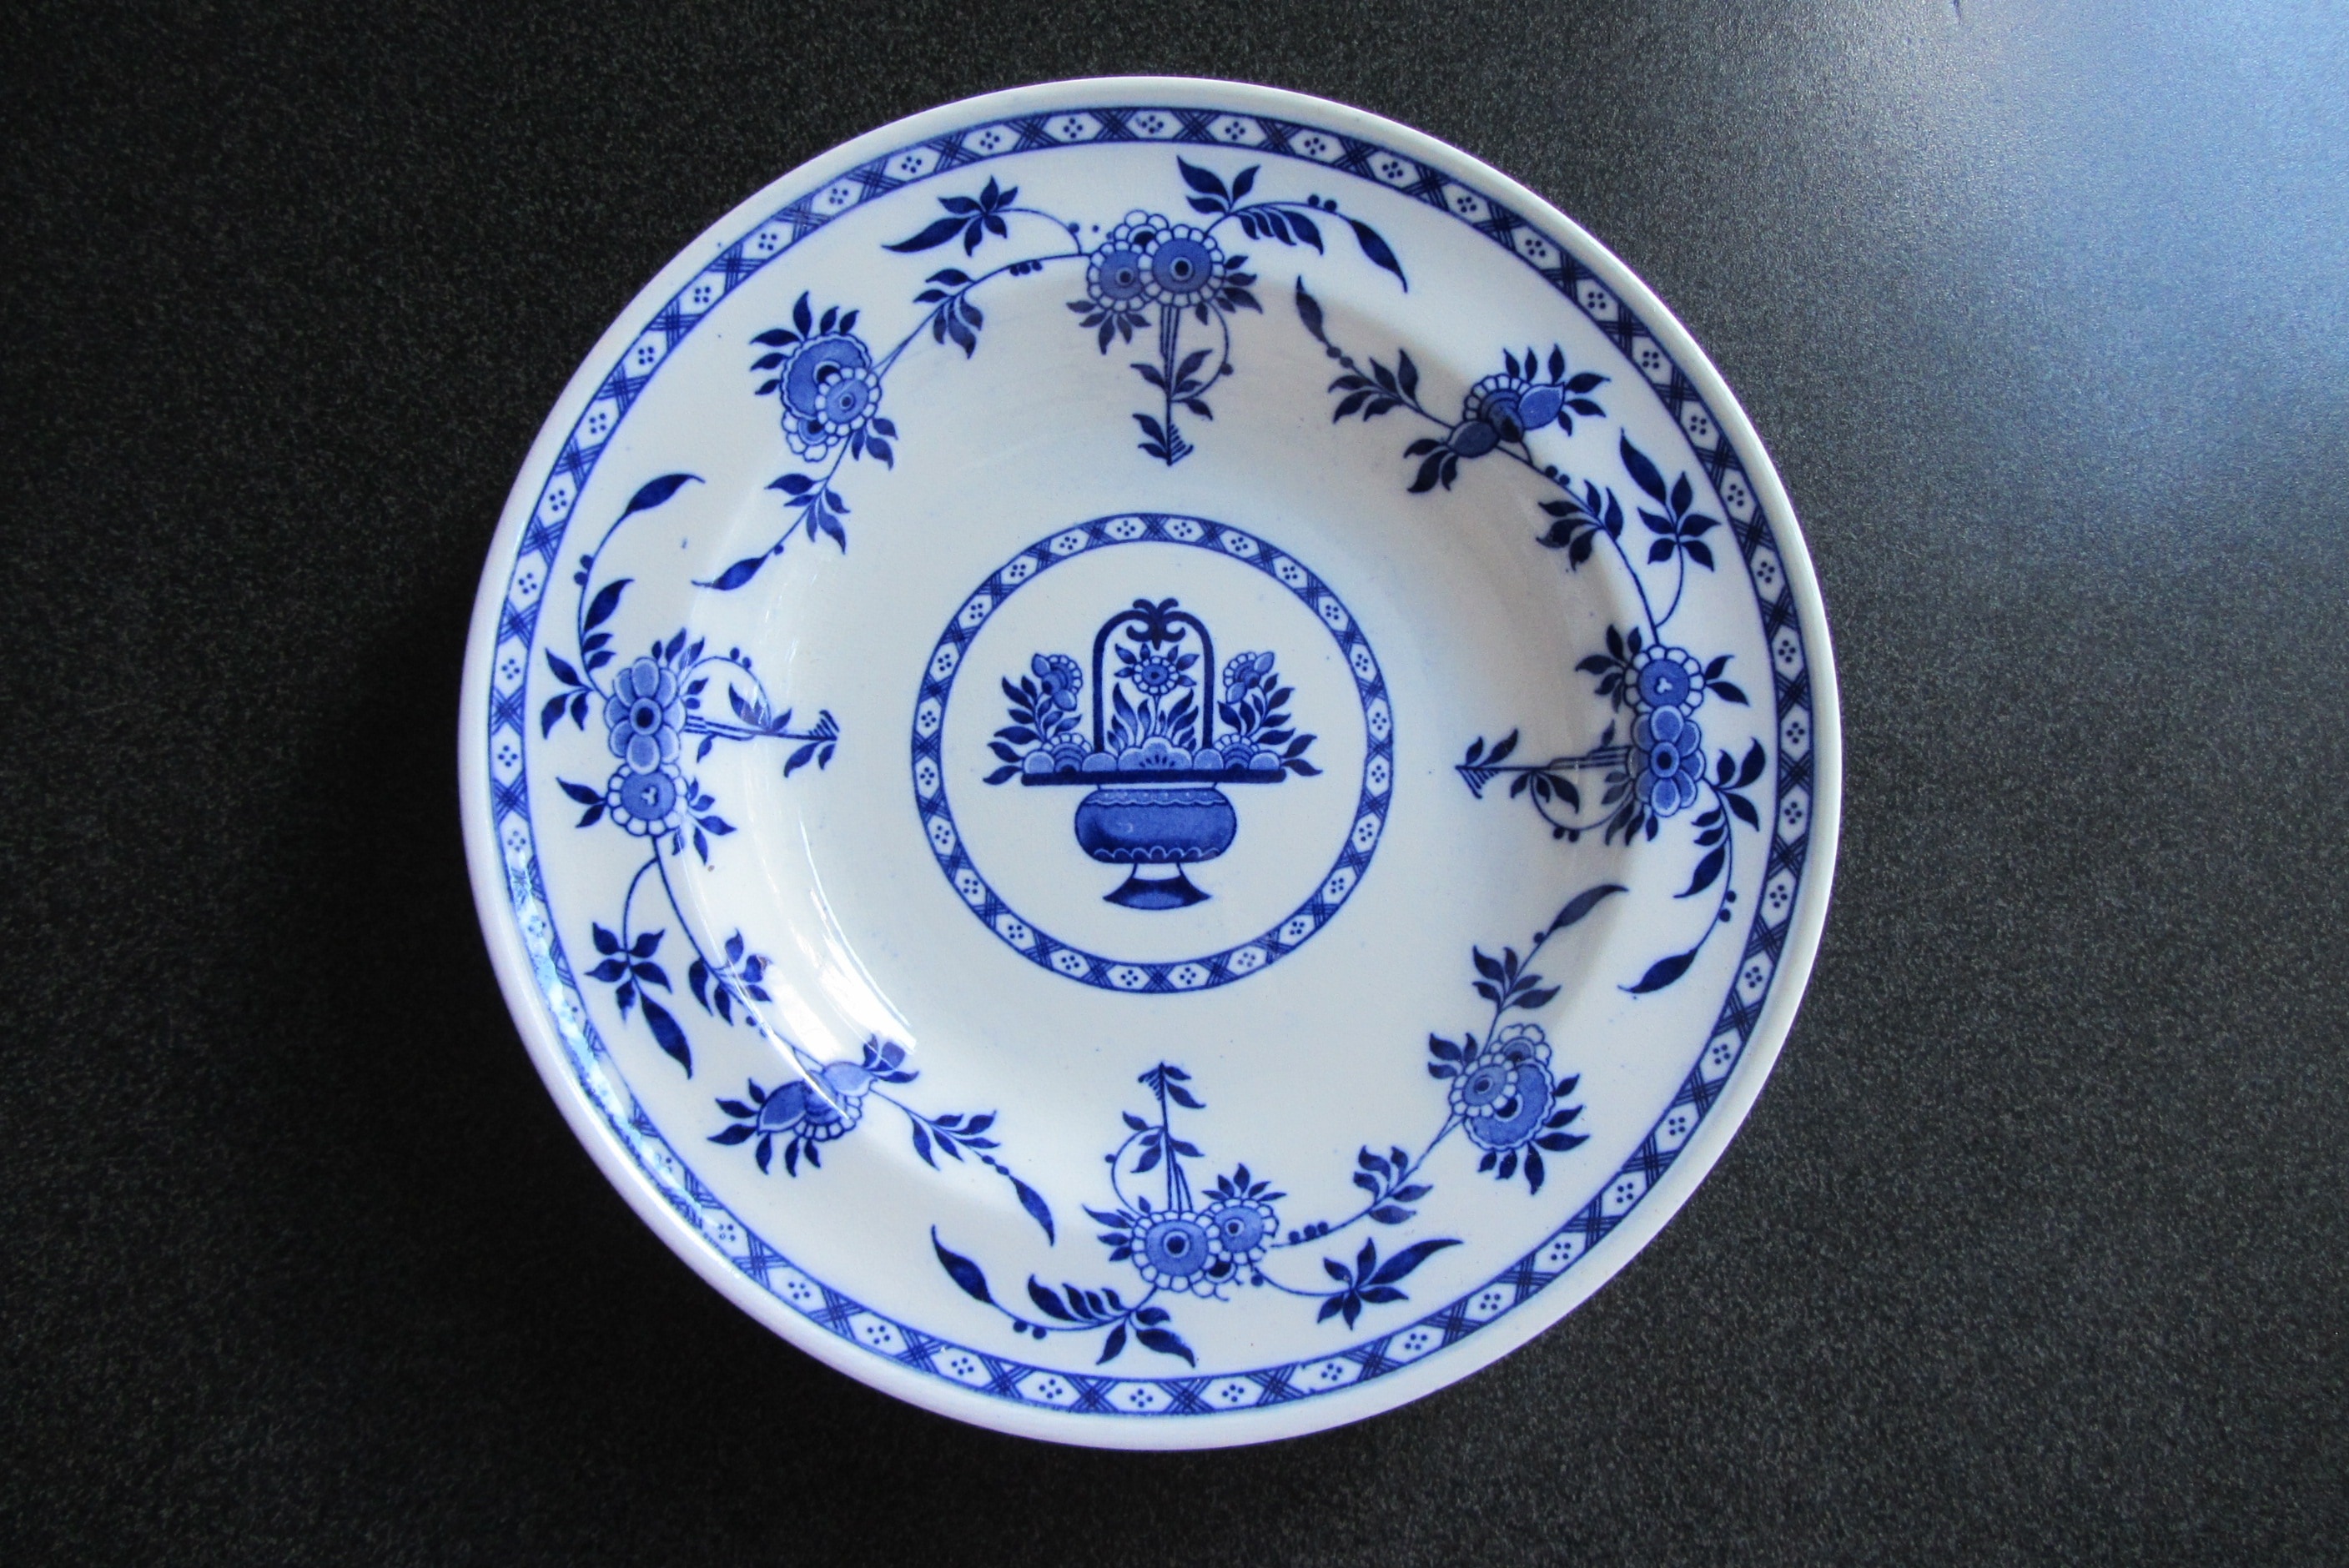 white and blue floral print ceramic plate